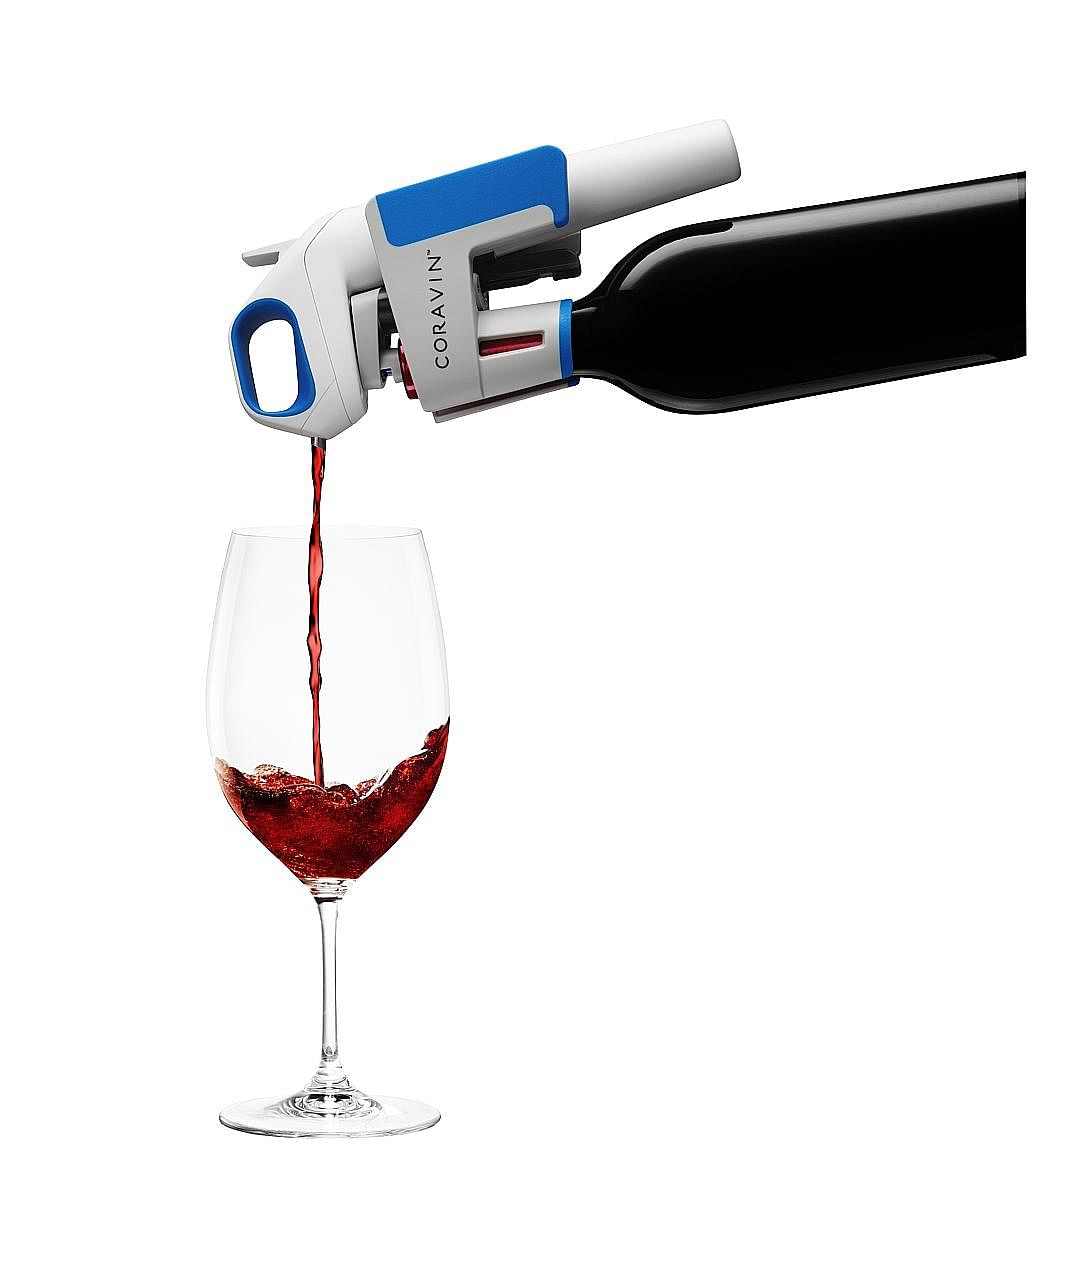 The D-Vine dispenses pre-packed 100ml servings of wine at the appropriate temperature and aeration. Coravin chief executive officer Frederic Levy can enjoy wine tasting at every dinner with the wine dispenser as corks reseal when the needle is remove